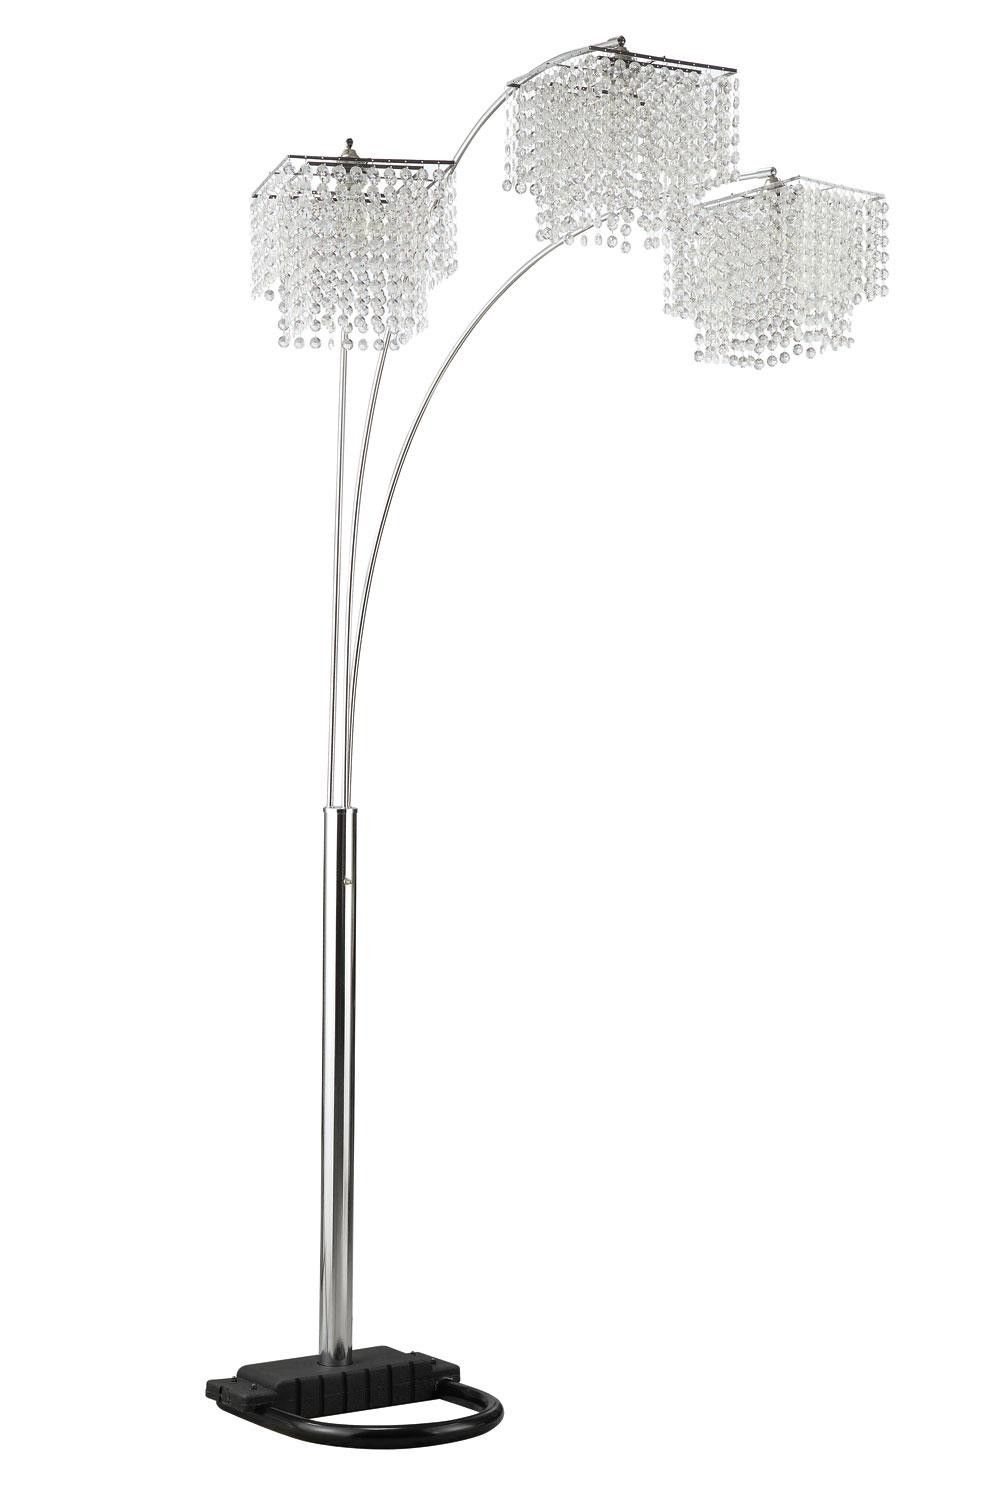 Lights Cool Floor Lamp Design With Luxury Crystal Floor Lamp Intended For Free Standing Chandelier Lamps (View 7 of 25)